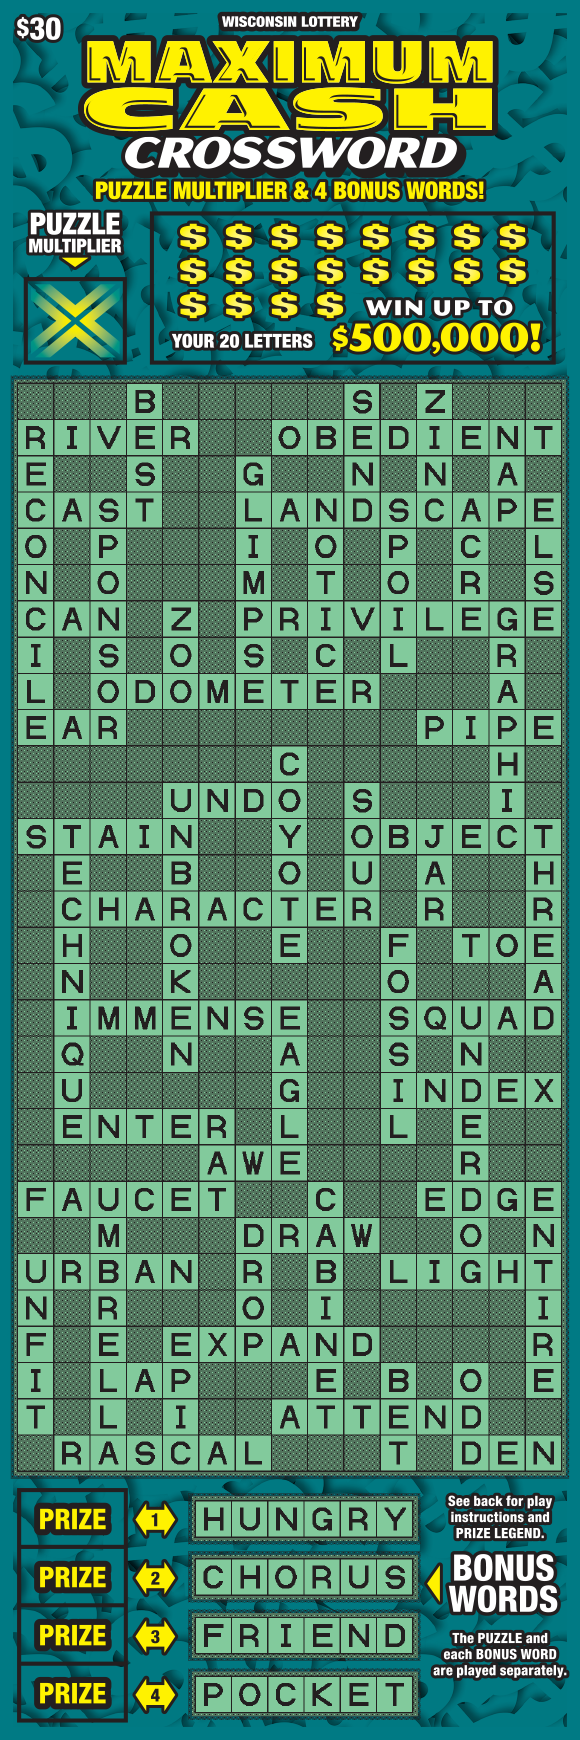 Wisconsin Scratch Game, Maximum Cash Crossword teal background with yellow text.